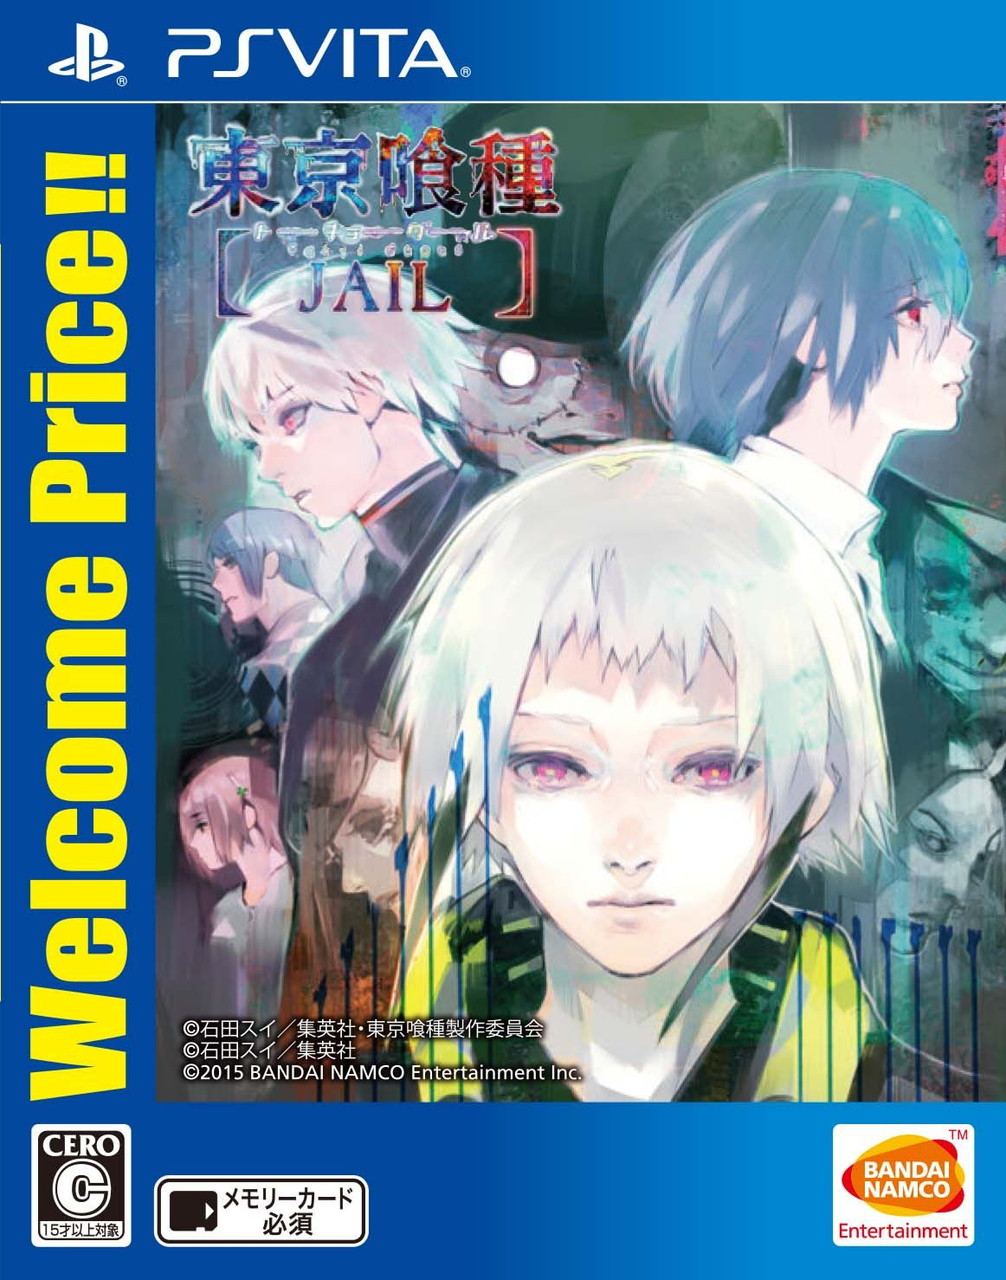 Tokyo Ghoul Jail (Welcome Price!!) for PlayStation Vita